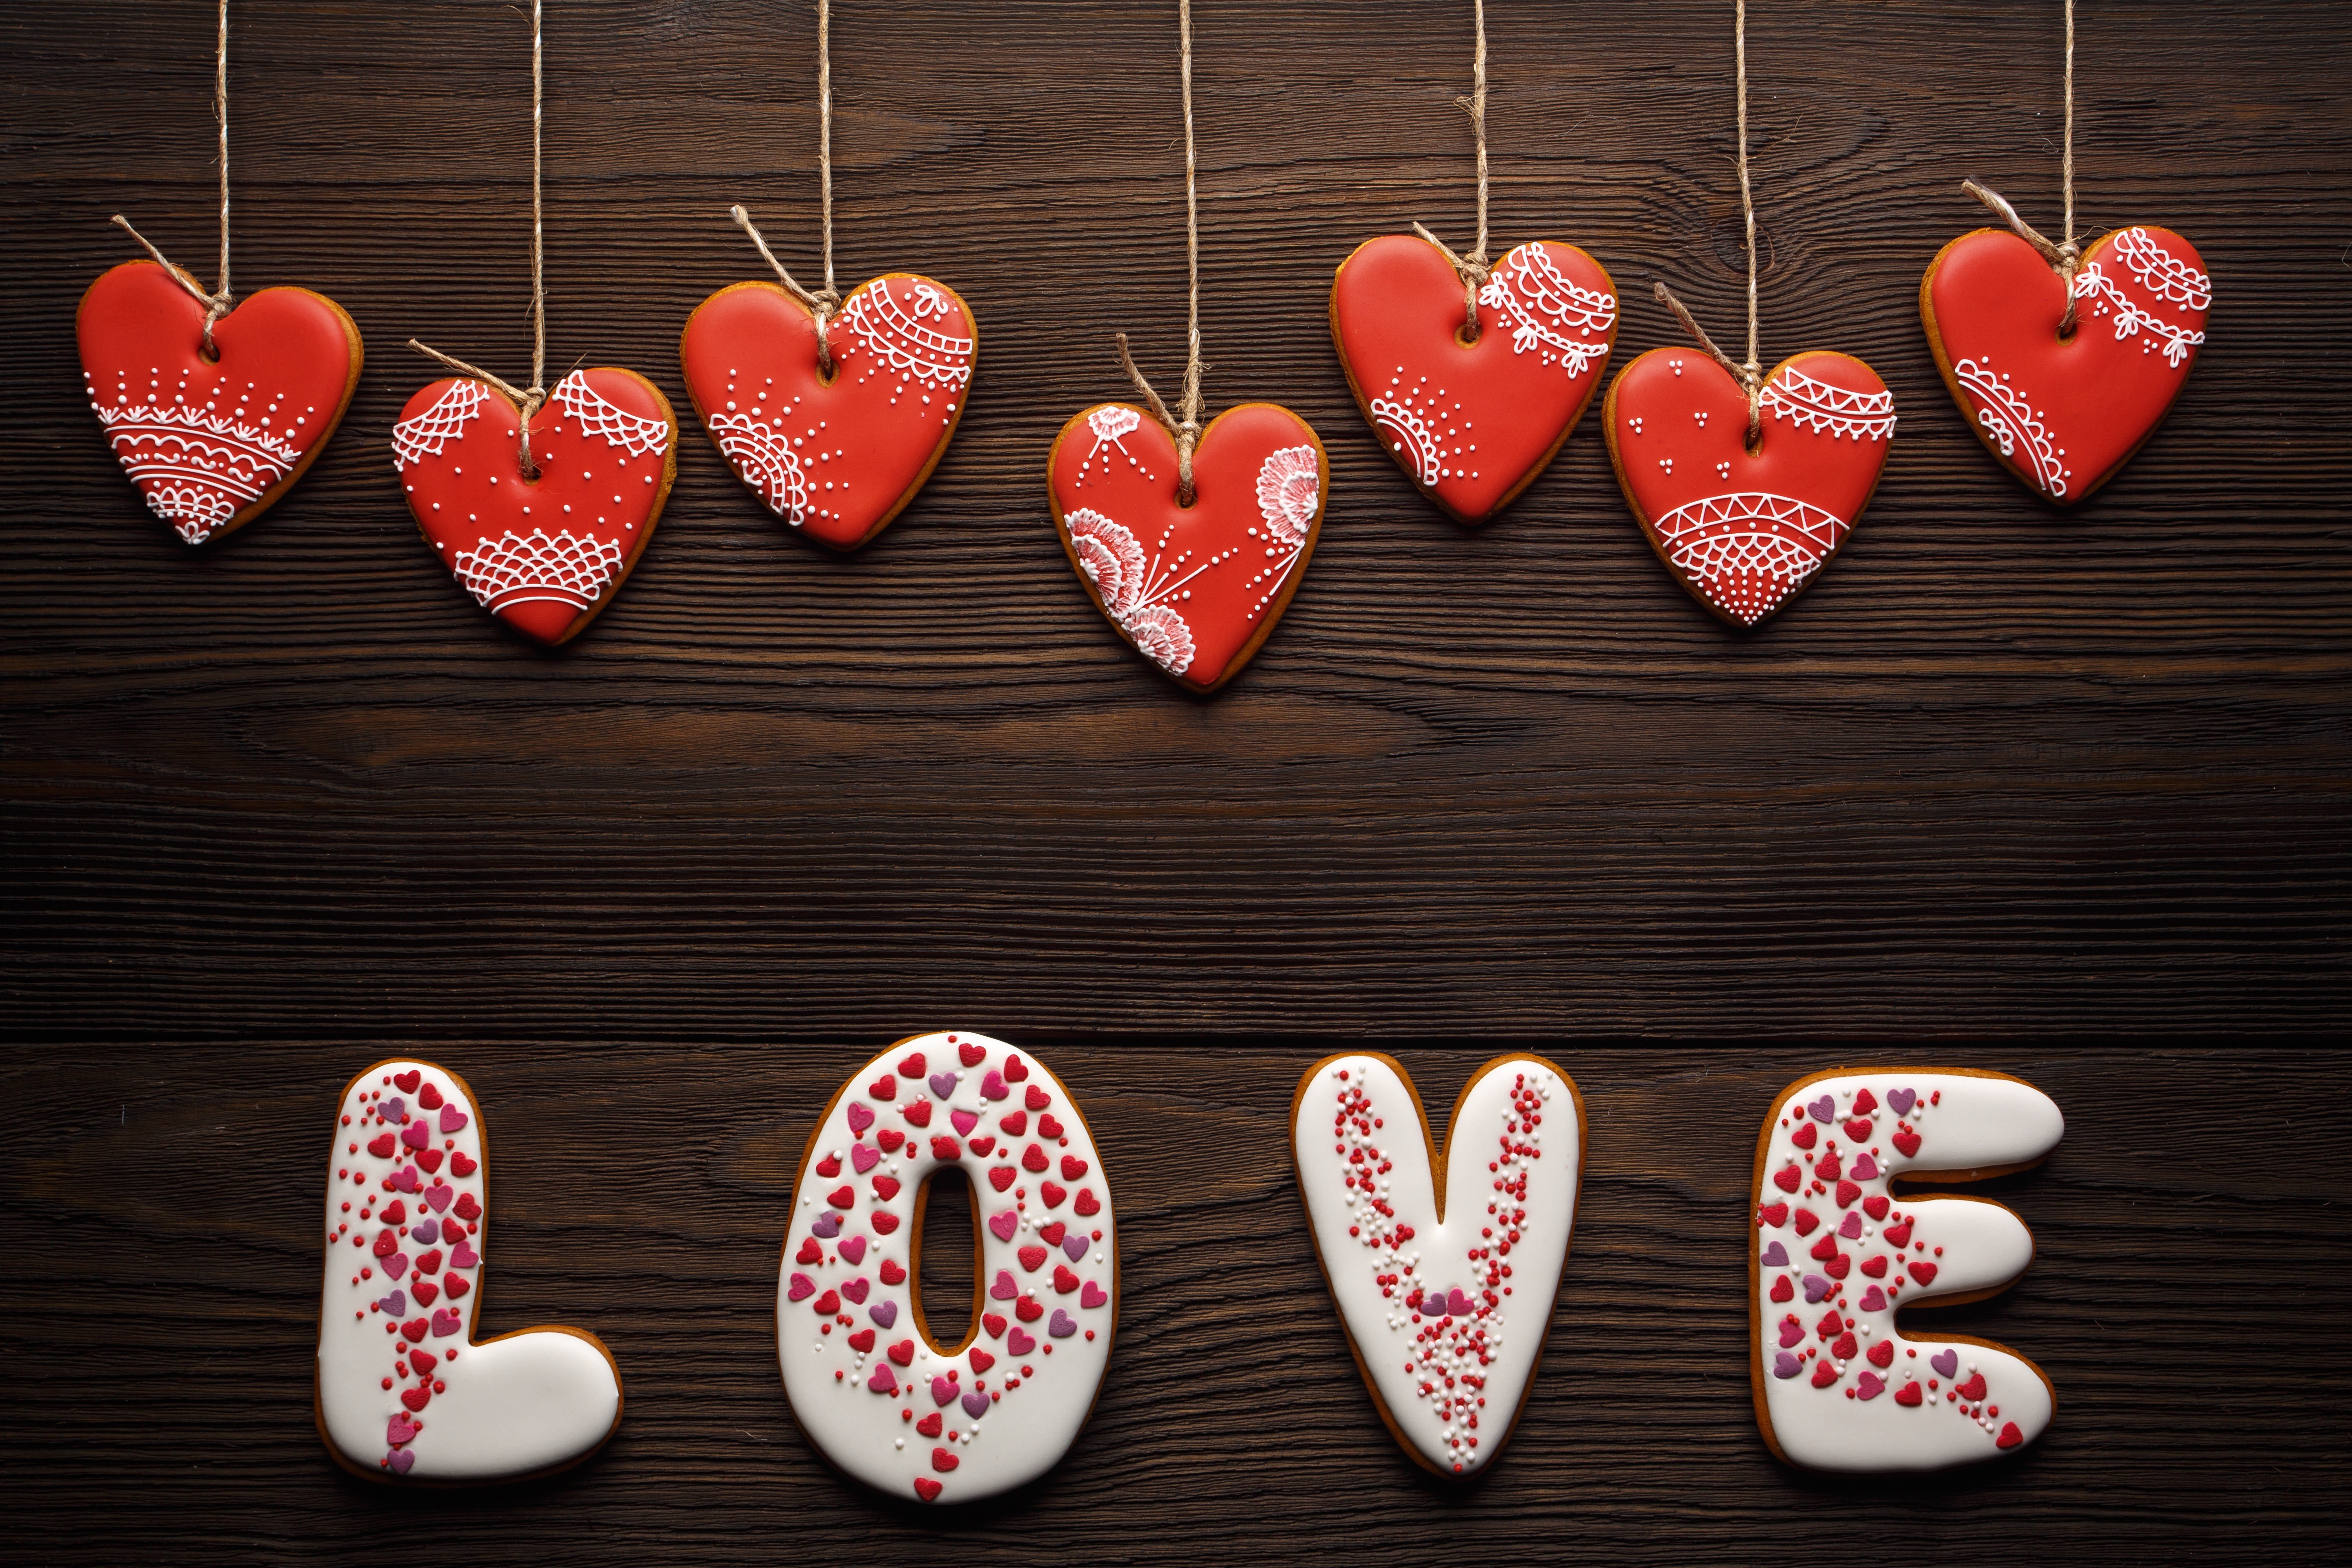 love, artistic, cookie, heart, heart shaped, romantic, valentine's day